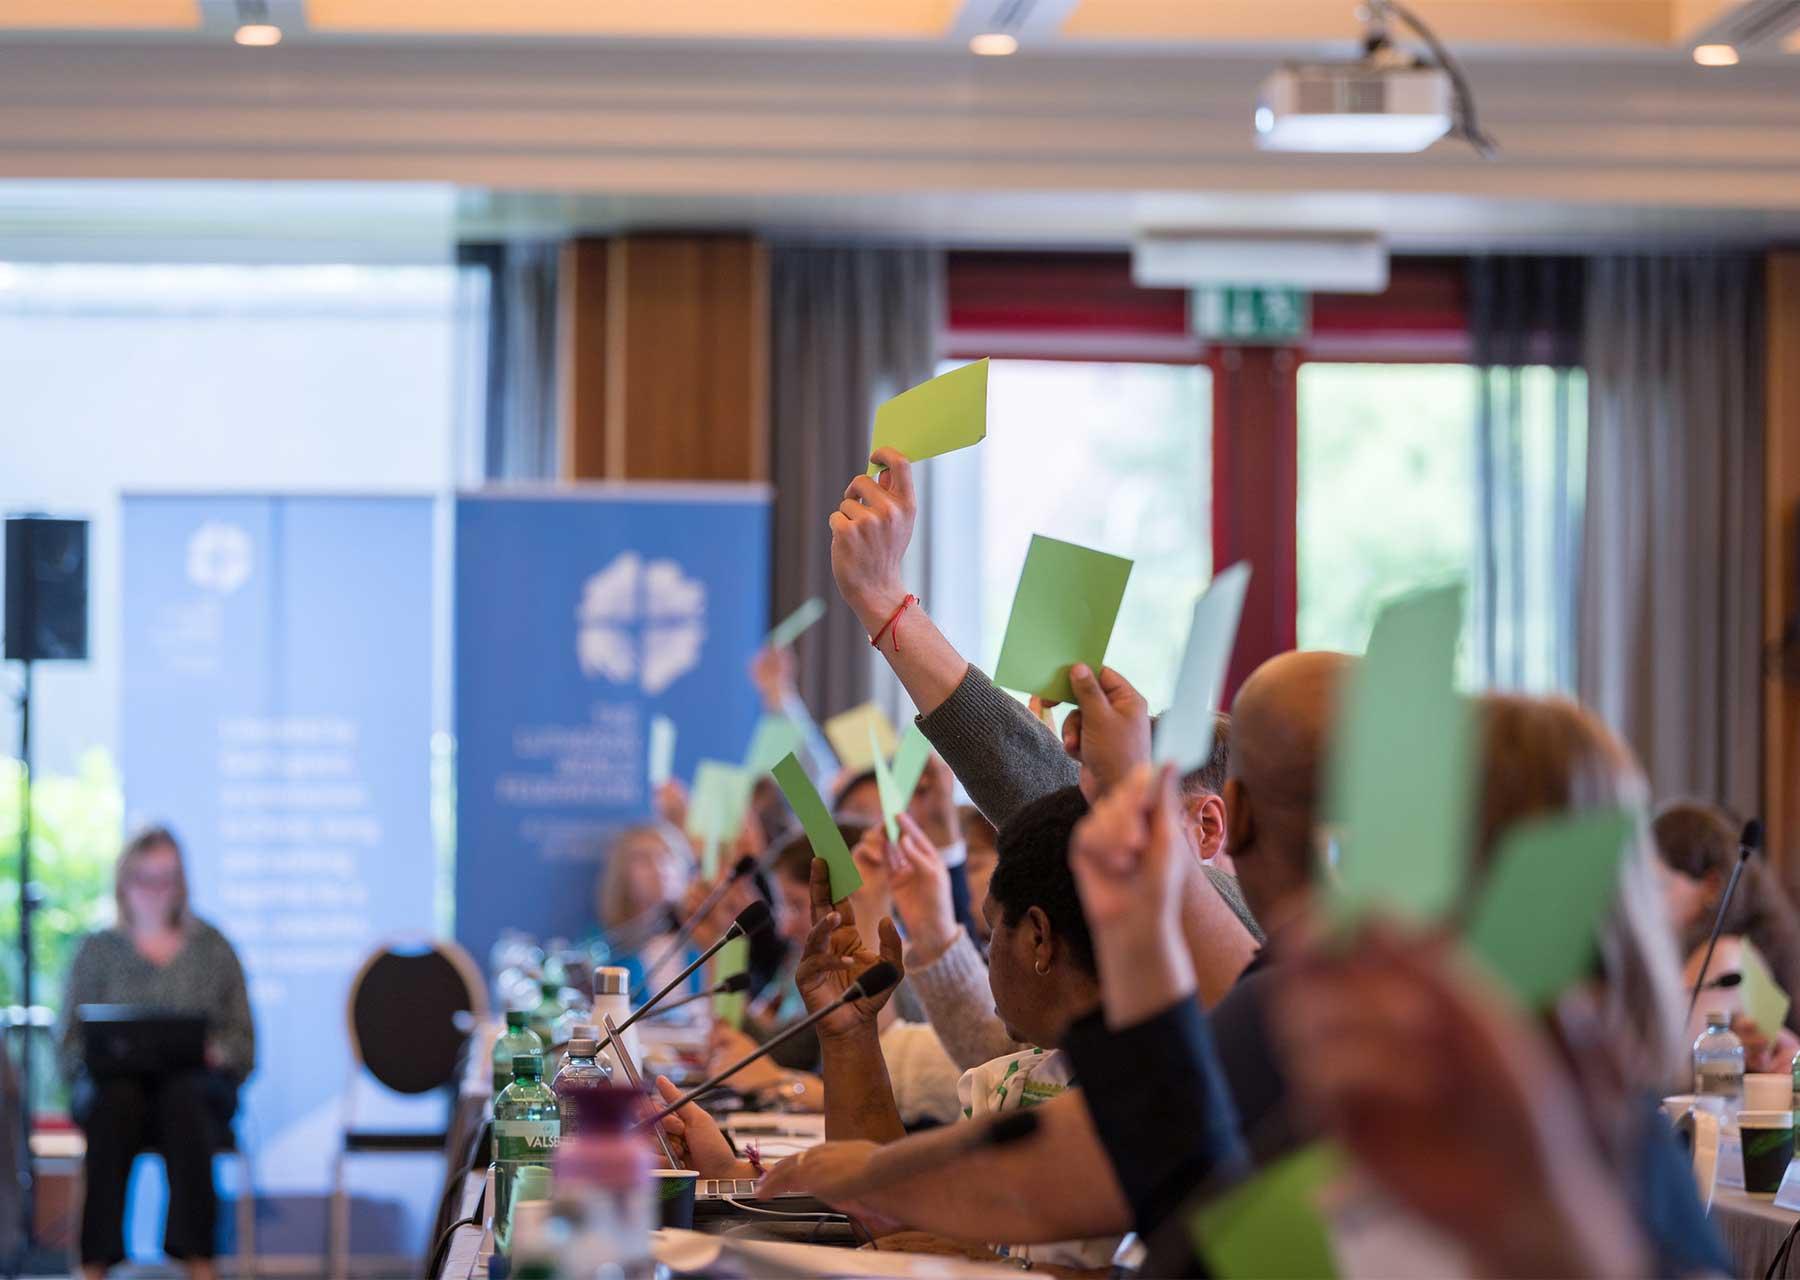 Council Members raise green cards to vote to approve a new LWF strategy for the period 2025-2031. Photo: LWF/Albin Hillert 